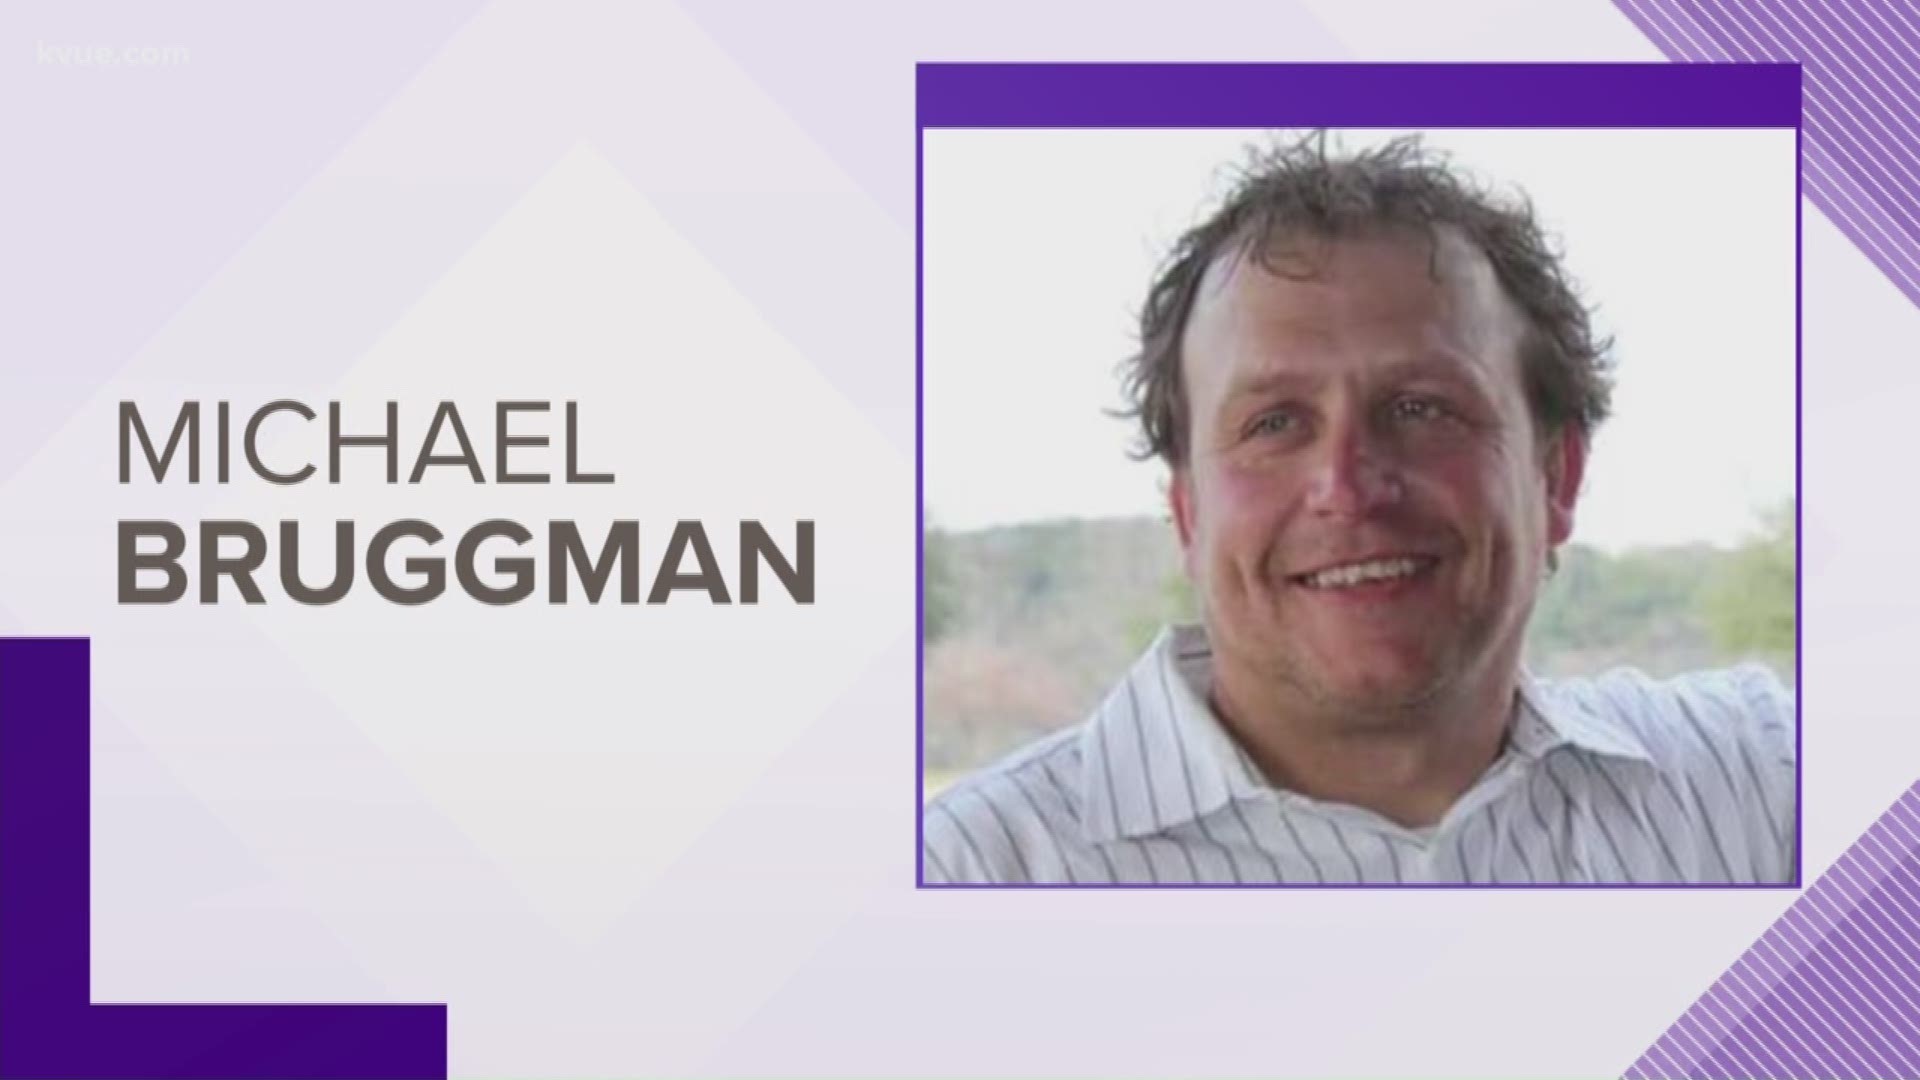 The man who was killed is a 44-year-old Michael Bruggman.